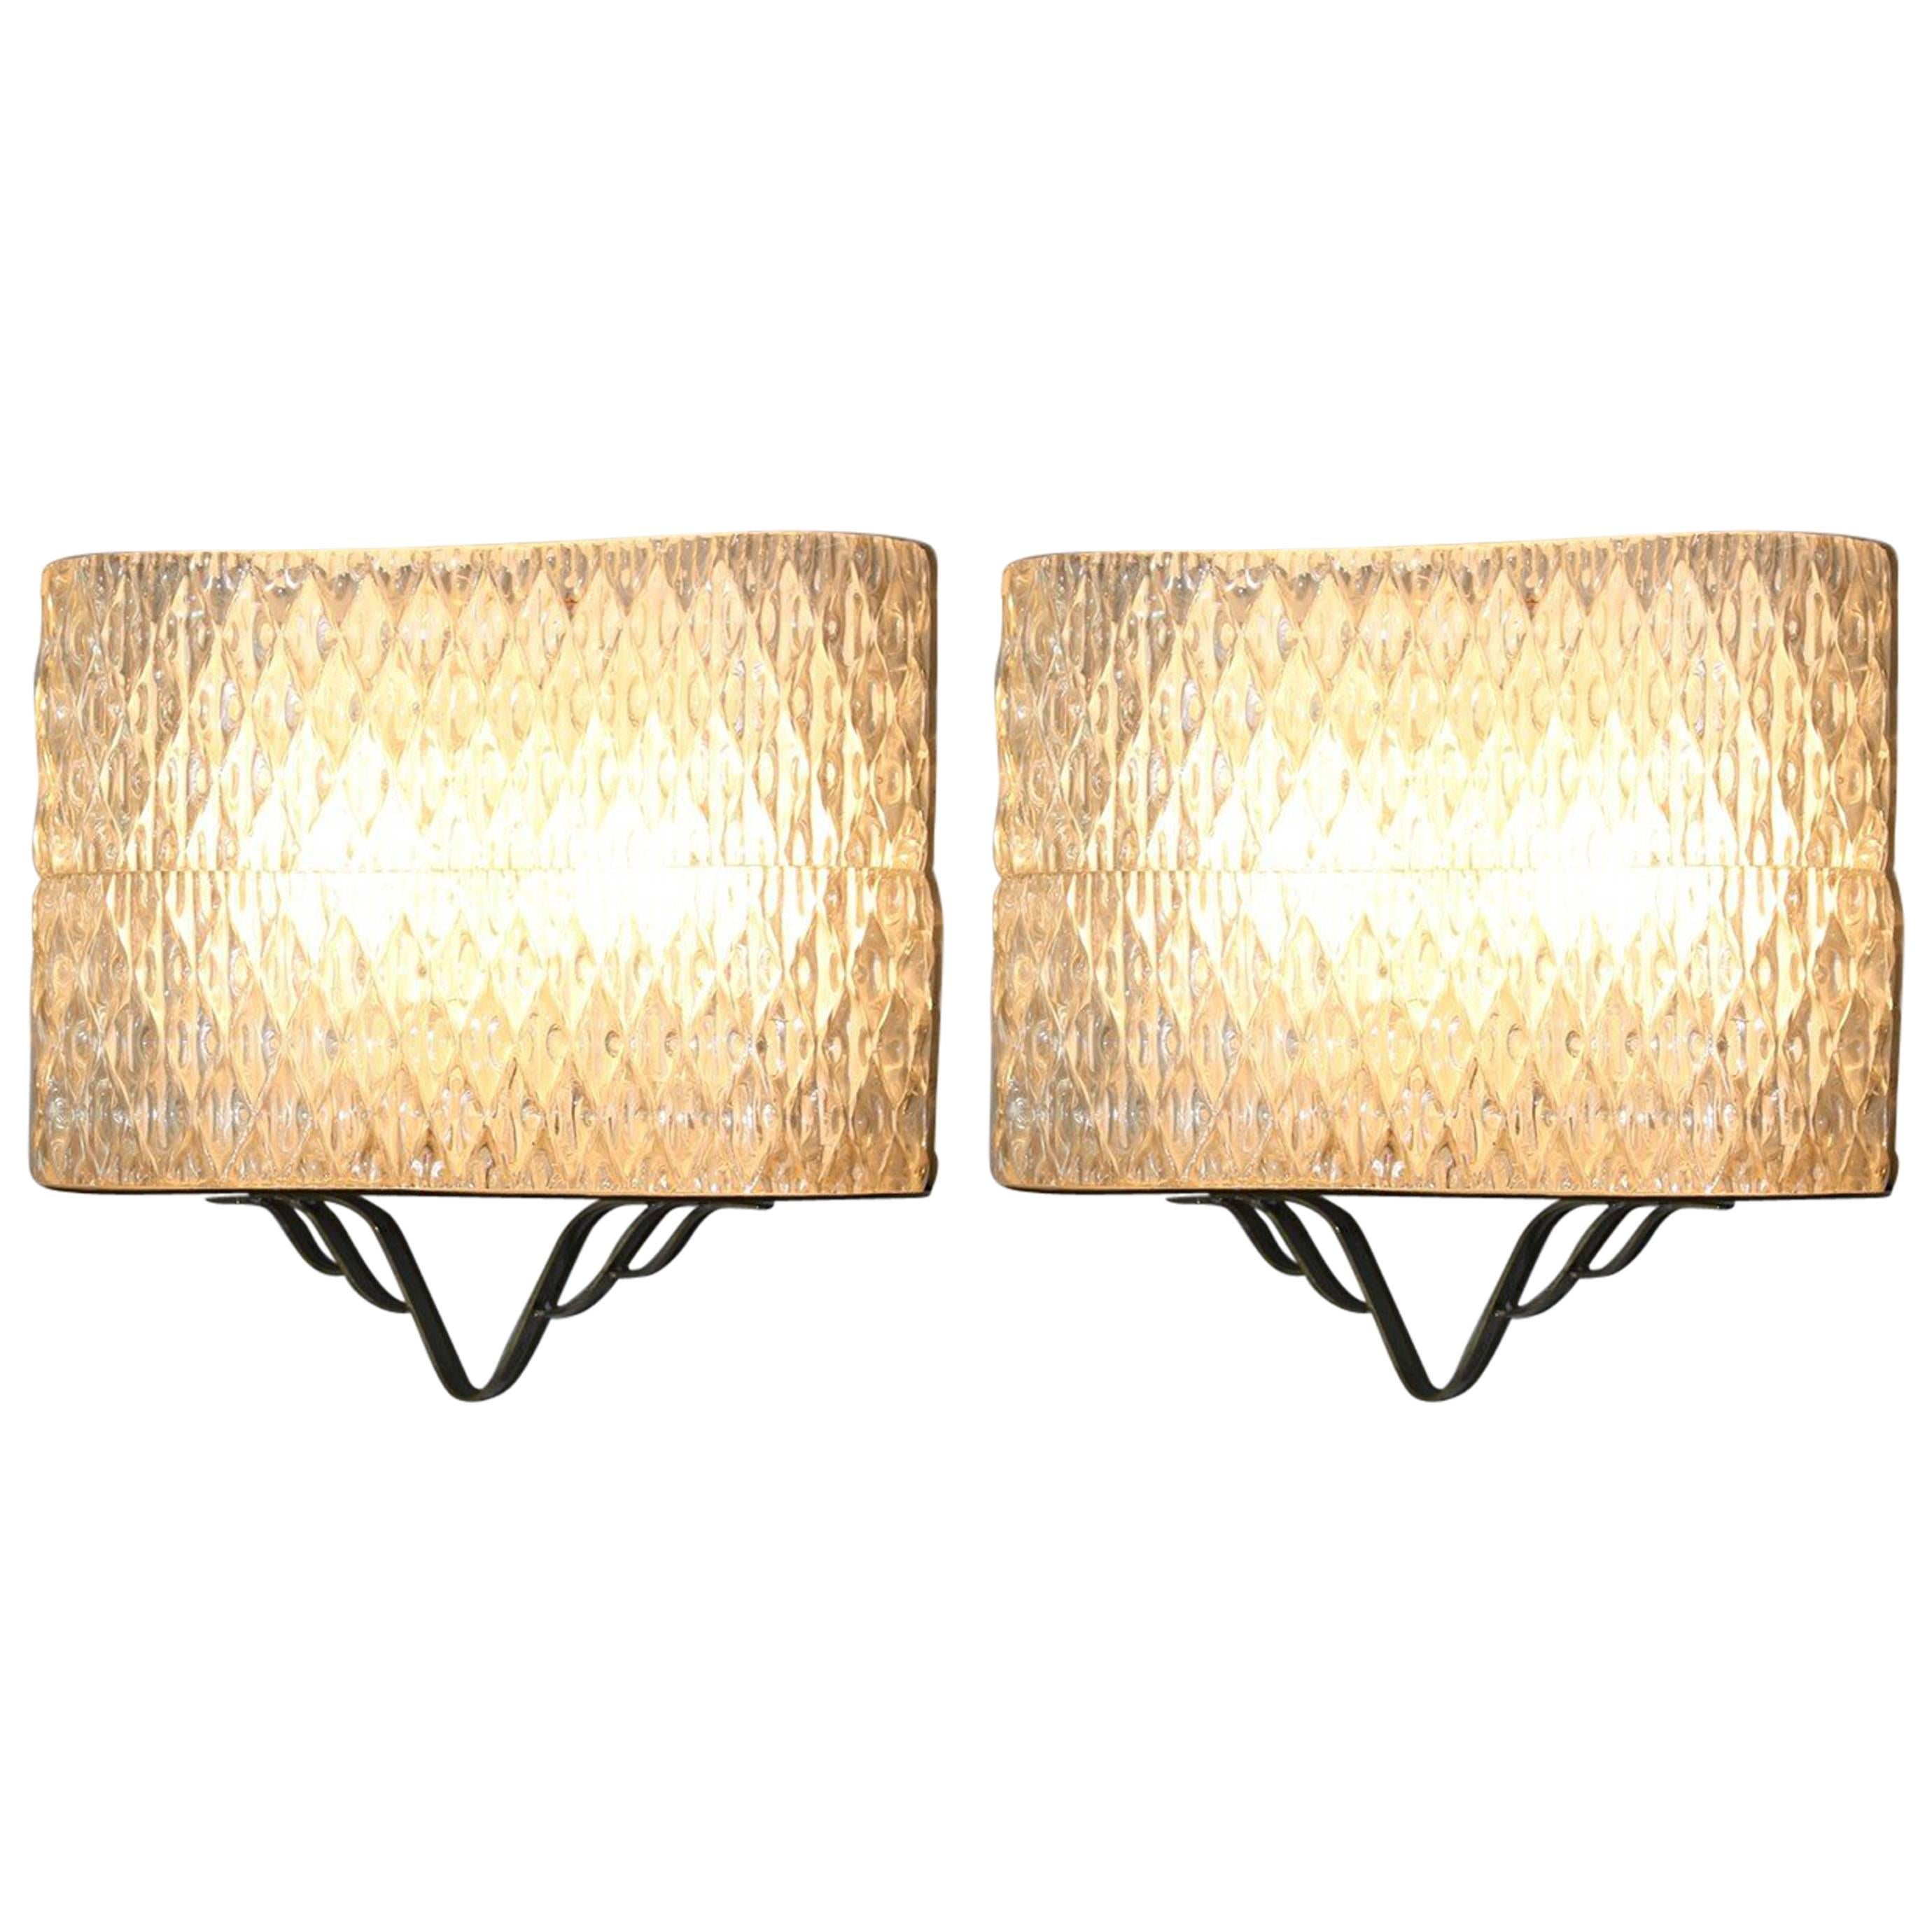 Pair of Wall Sconces with Brass, 1950s For Sale